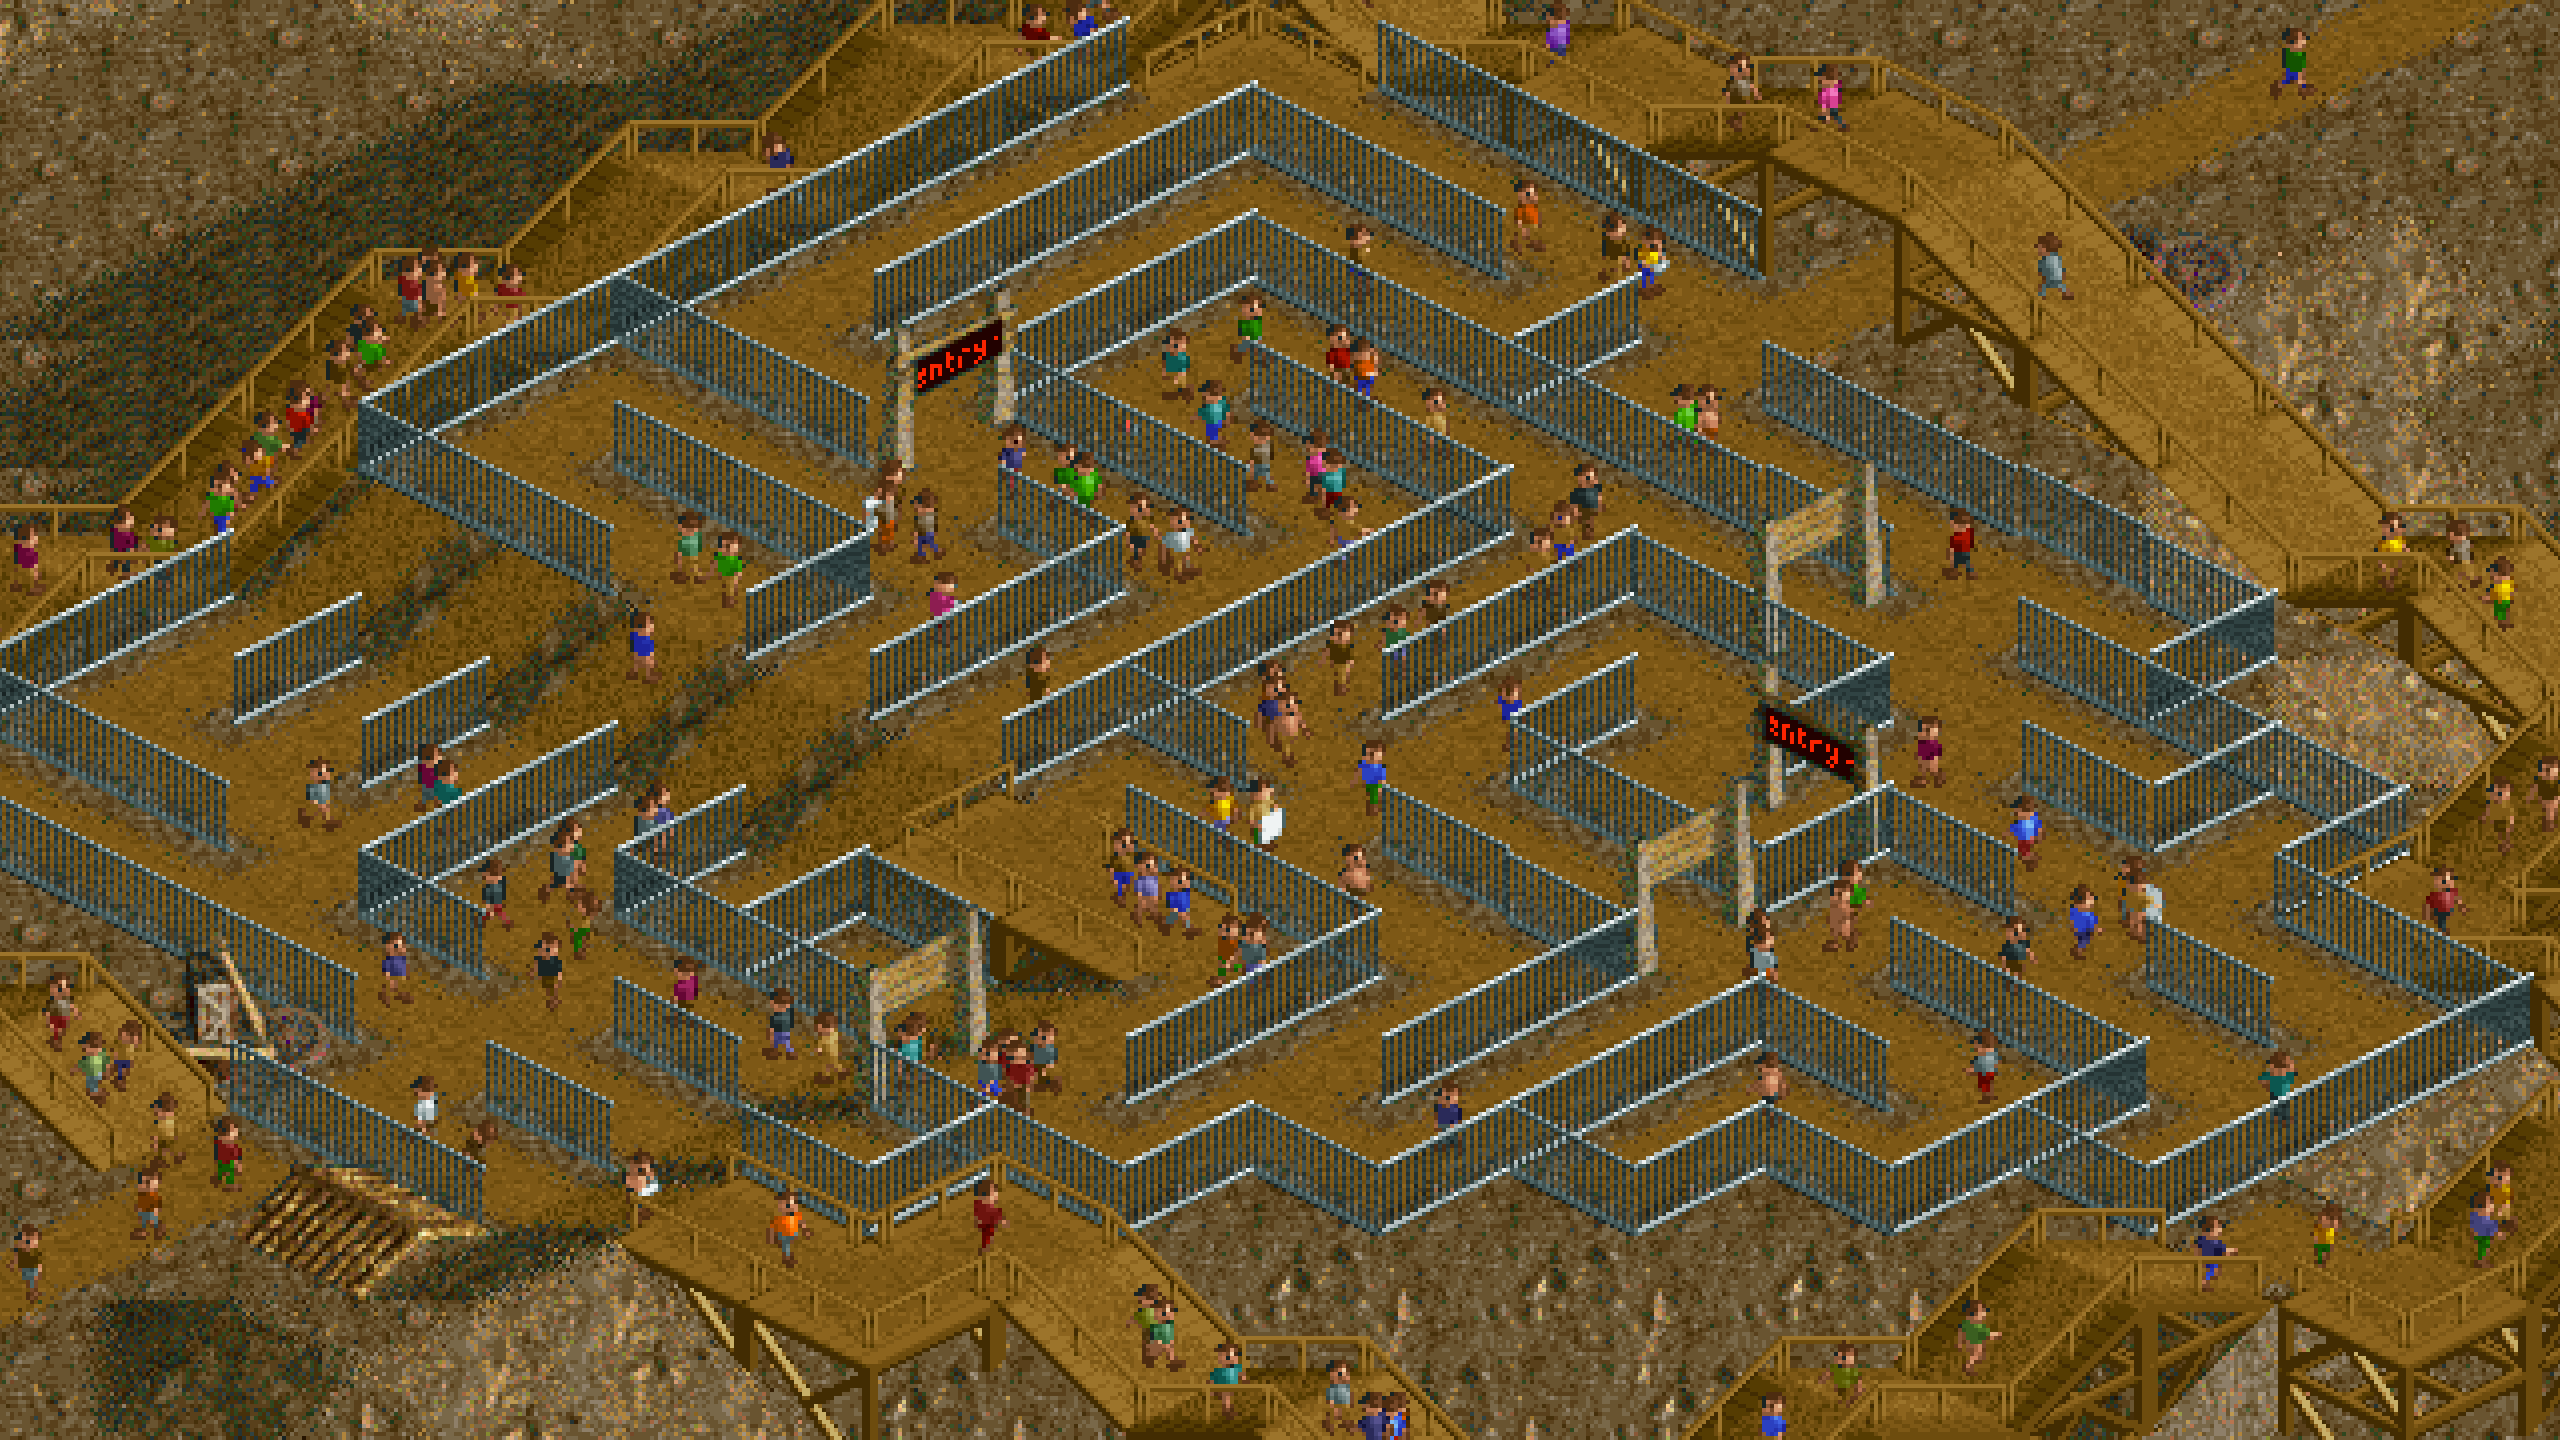 A maze, built using paths and fences.